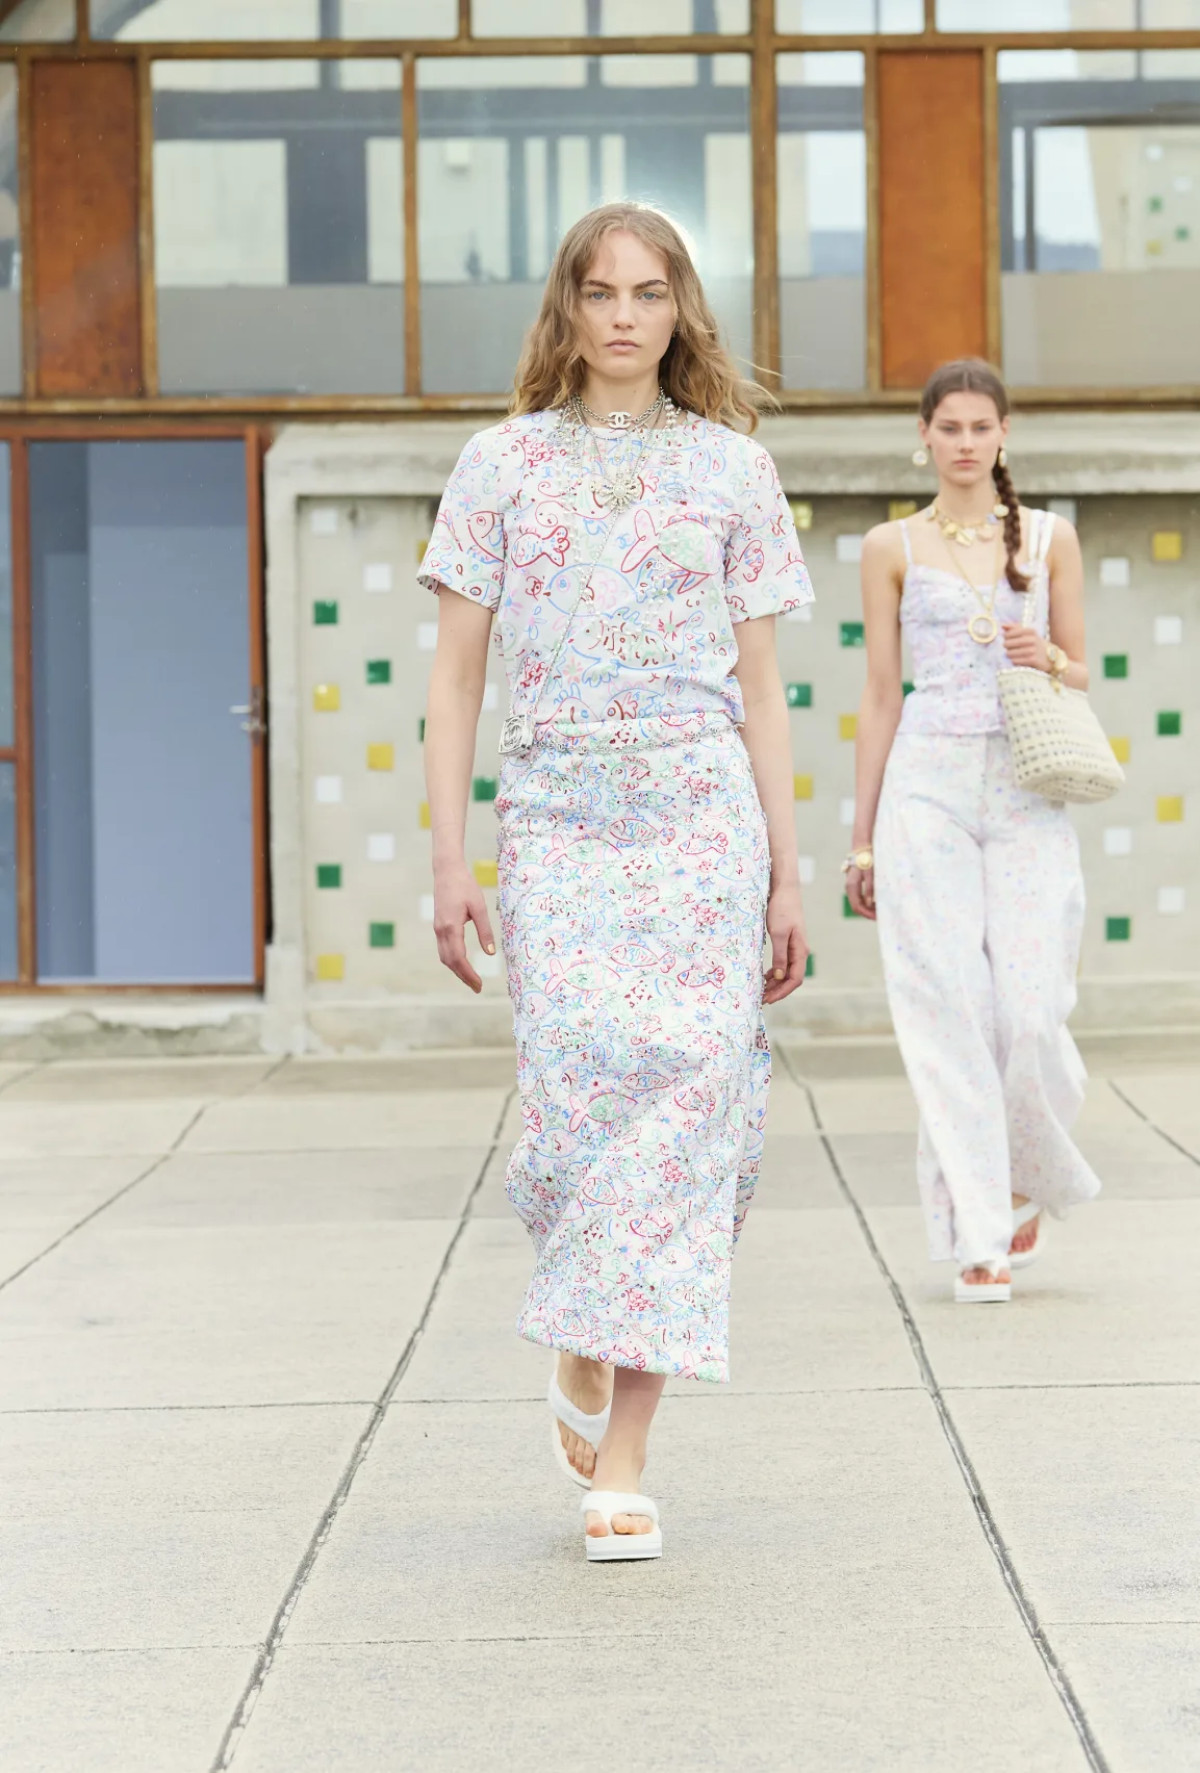 Chanel Cruise 2024/25 solar energy of Marseille in the new collection of Virginie Viard